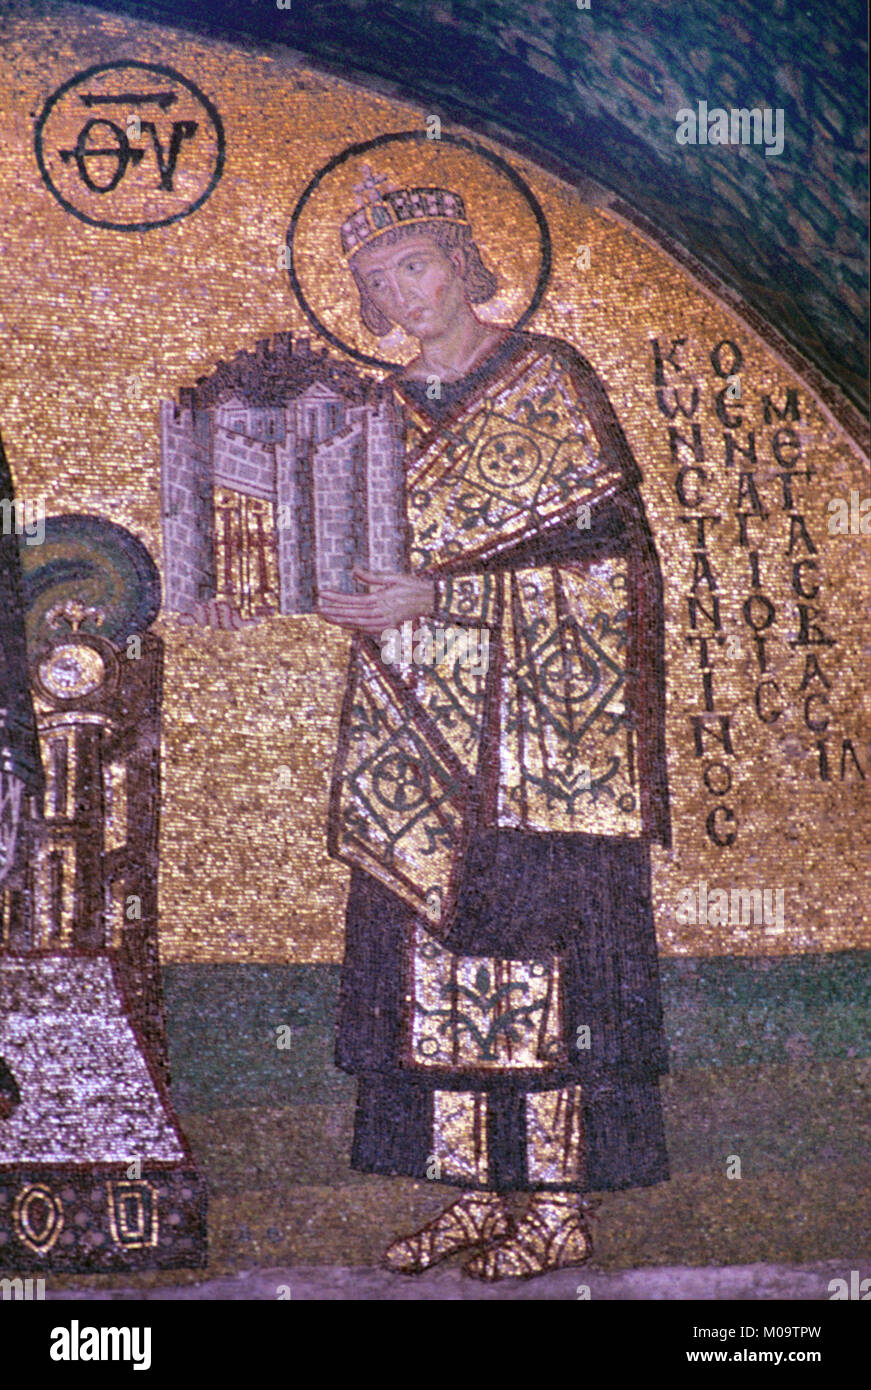 Byzantine Mosaic of Byzantine Emperor Constantine the Great or Saint Constantine I (272-337) Holding a Model or Offering of Byzantium or Constantinople to Virgin Mary in the Hagia Sophia Church Museum, Sultanahmet, Istanbul, Turkey Stock Photo